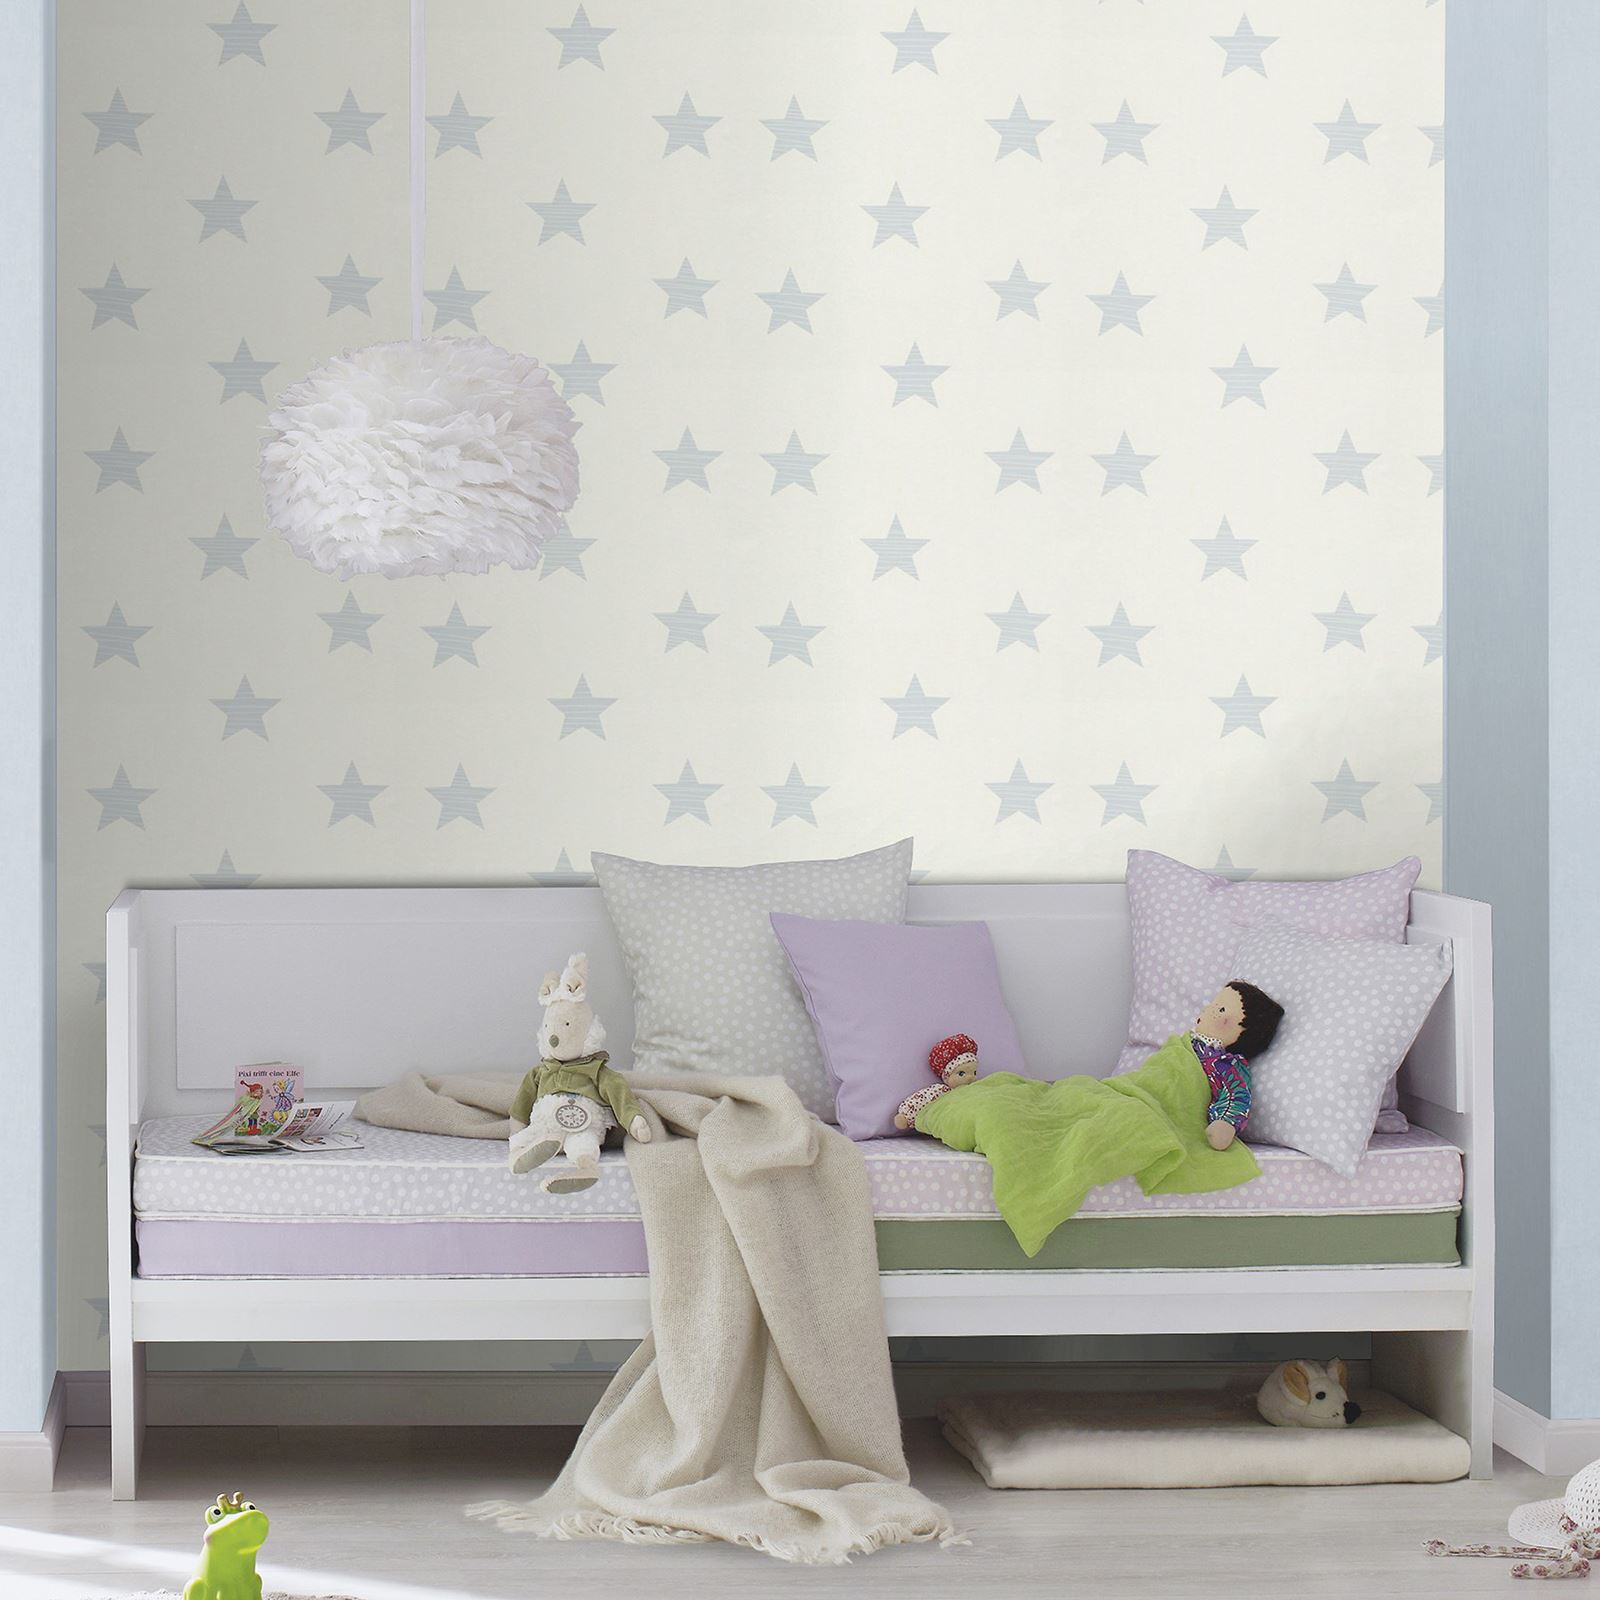 star wallpaper for bedroom,wallpaper,product,wall,room,lilac